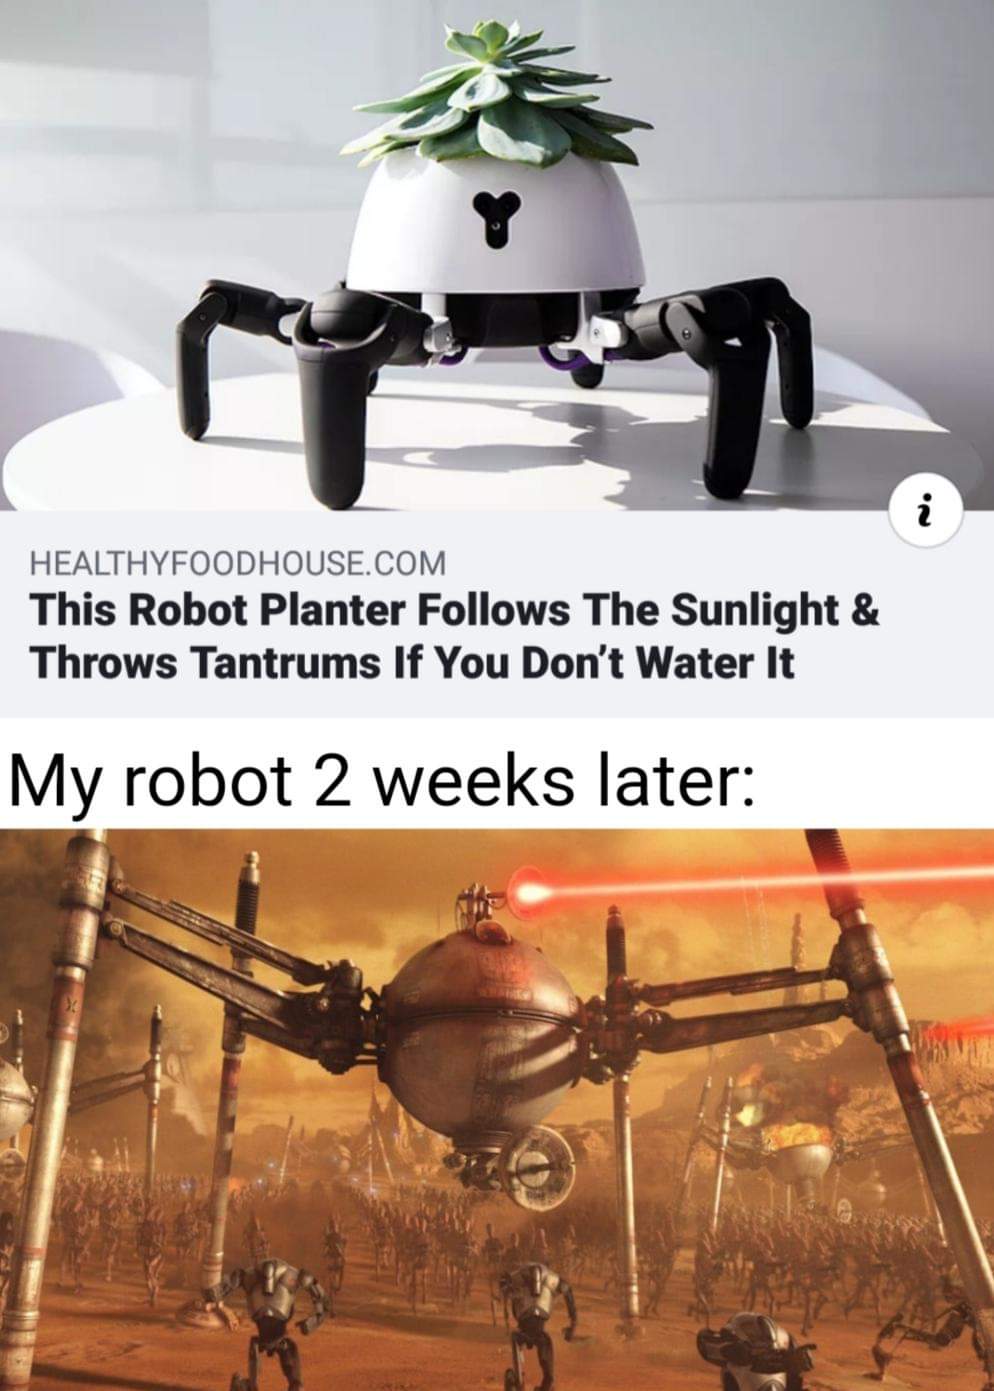 star wars homing spider droid - Healthyfoodhouse.Com This Robot Planter s The Sunlight & Throws Tantrums If You Don't Water It My robot 2 weeks later